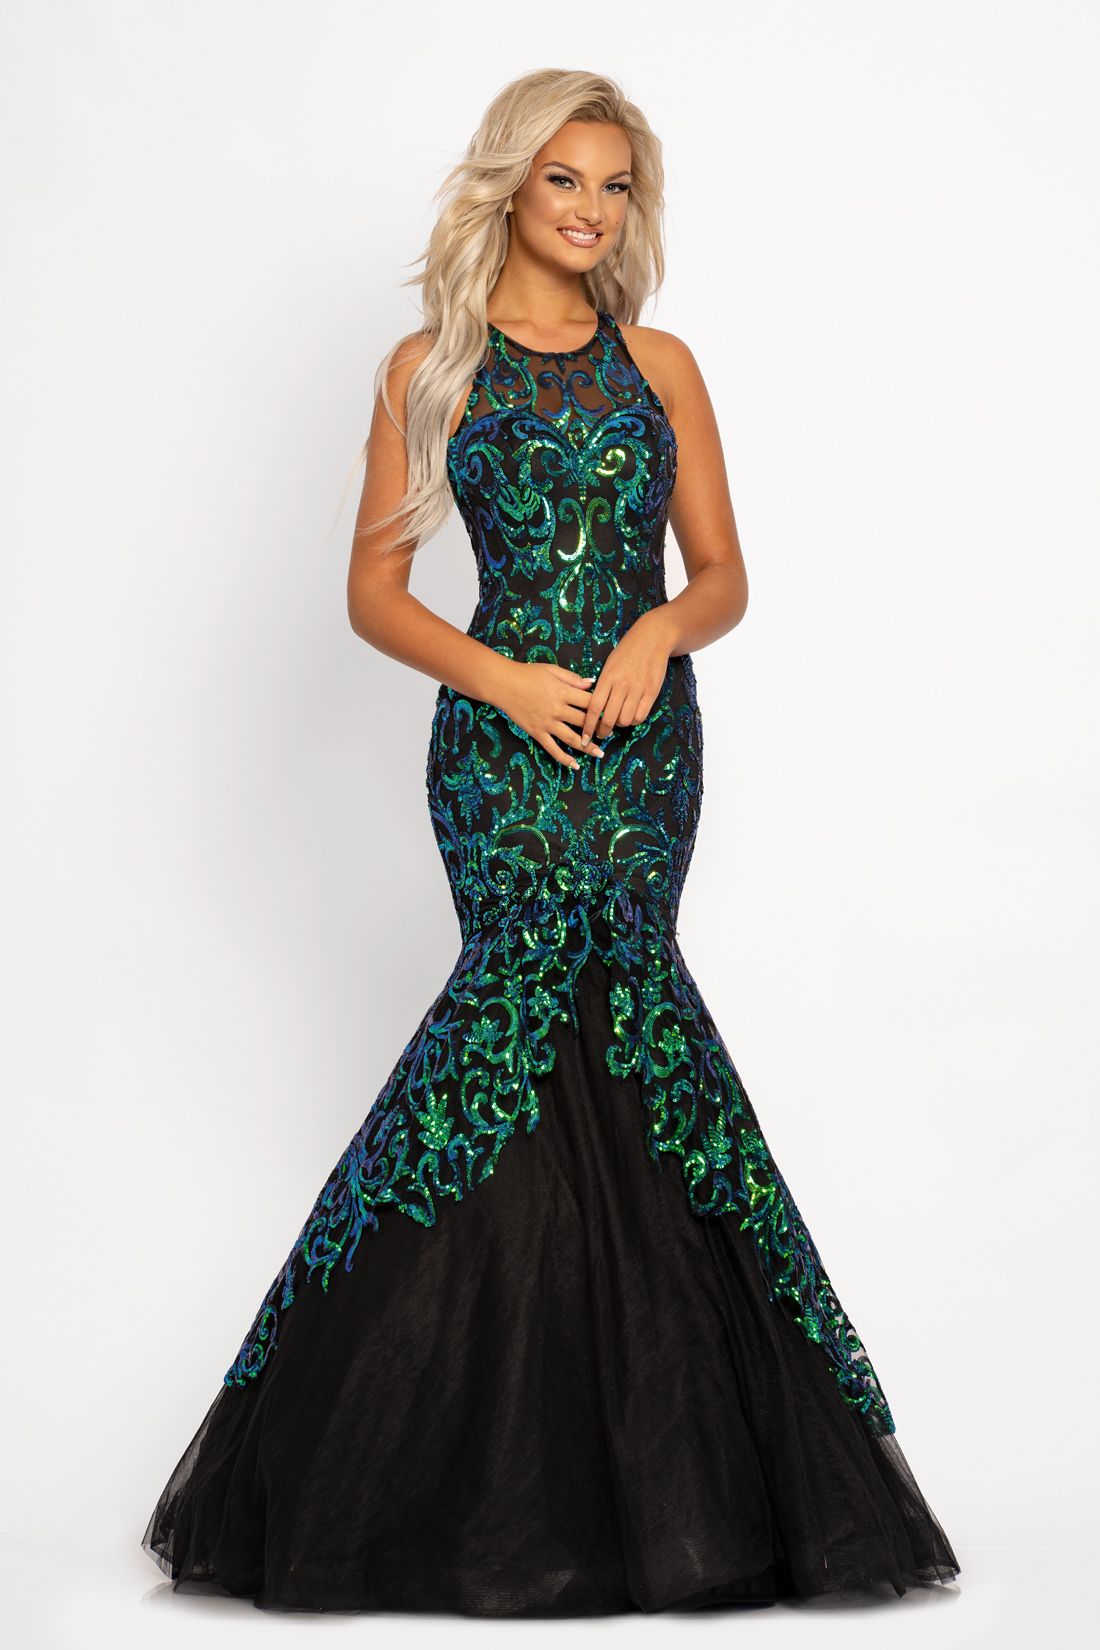 Johnathan Kayne 2215 High sheer neckline fitted mermaid prom dress sequin embellished. This pageant gown has a cutout back. The embellished sequin mesh long skirt has a full sweeping train. Makes a beautiful wedding gown in Ivory.   Colors  Ivory, Magenta, Mermaid/Black  Sizes  00, 0, 2, 4, 6, 8, 10, 12, 14, 16, 18, 20